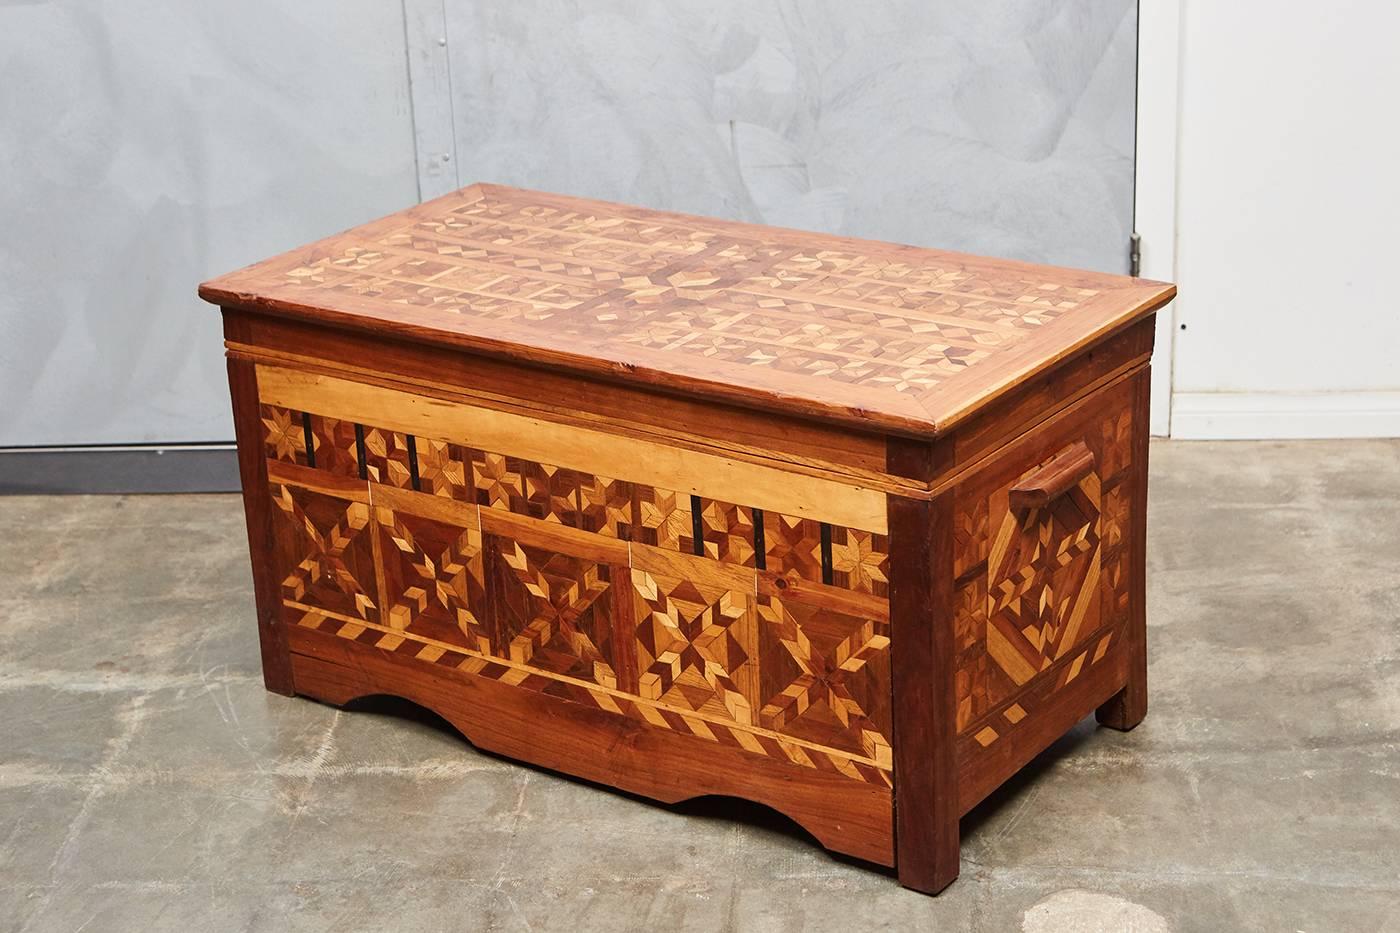 This American Folk Art trunk has wonderful inlaid patterned parquetry on all sides with a cedar interior. The trunk stands on for feet with a carved skirt and wooden handles.
   